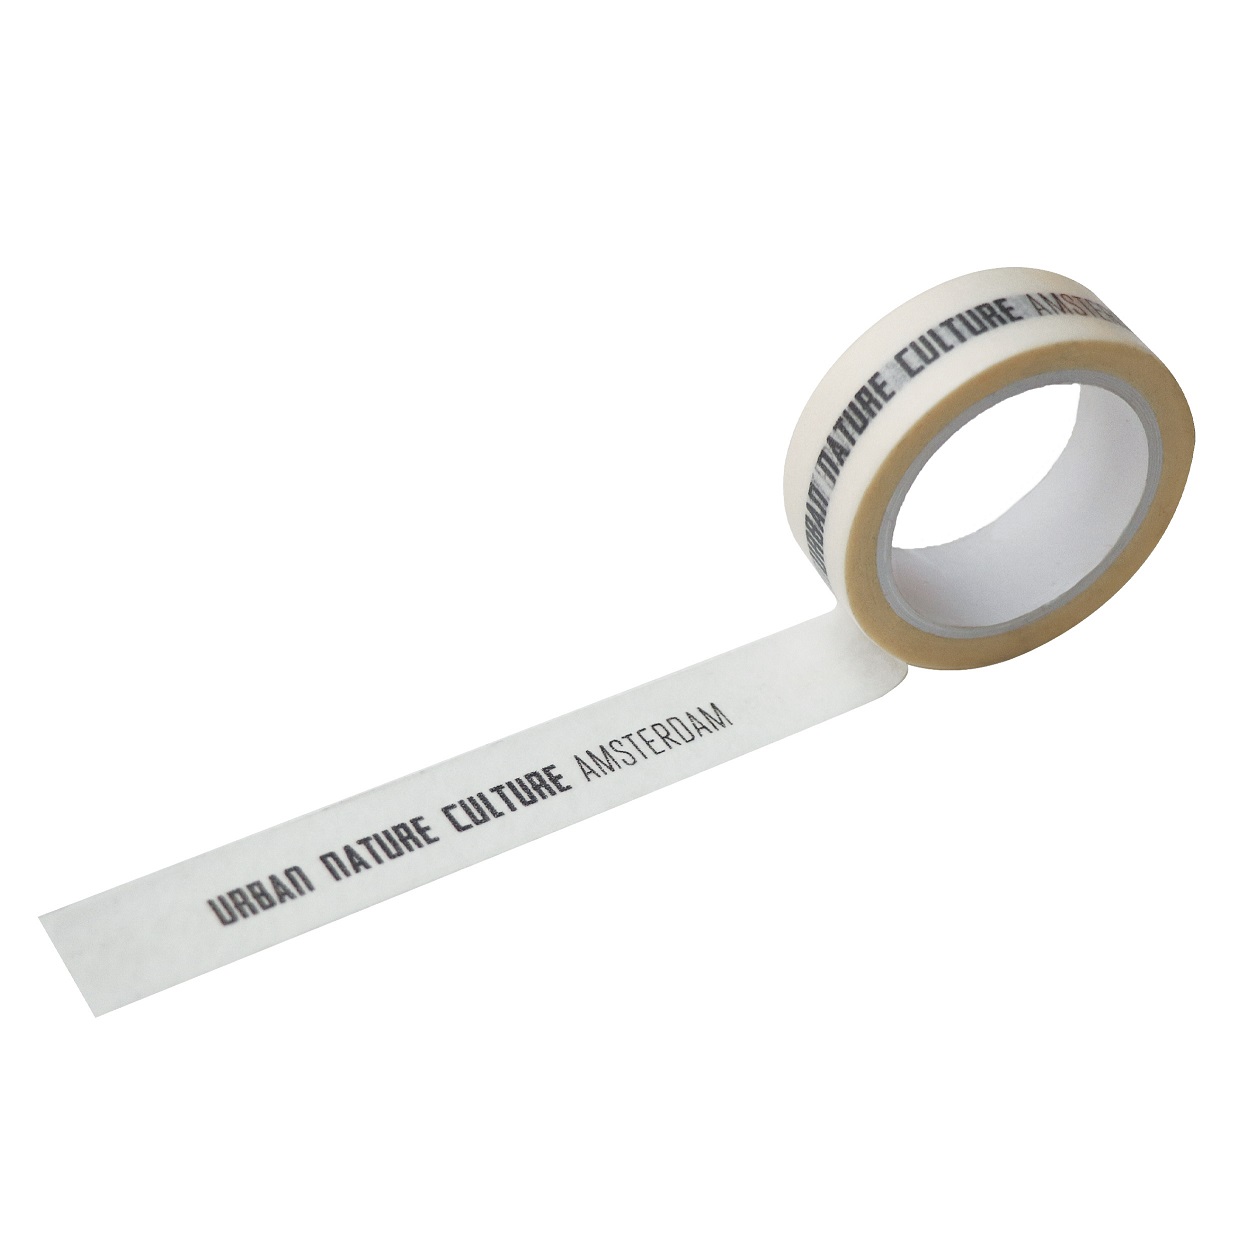 Unc Washi Tape 10mtr Natural Gift